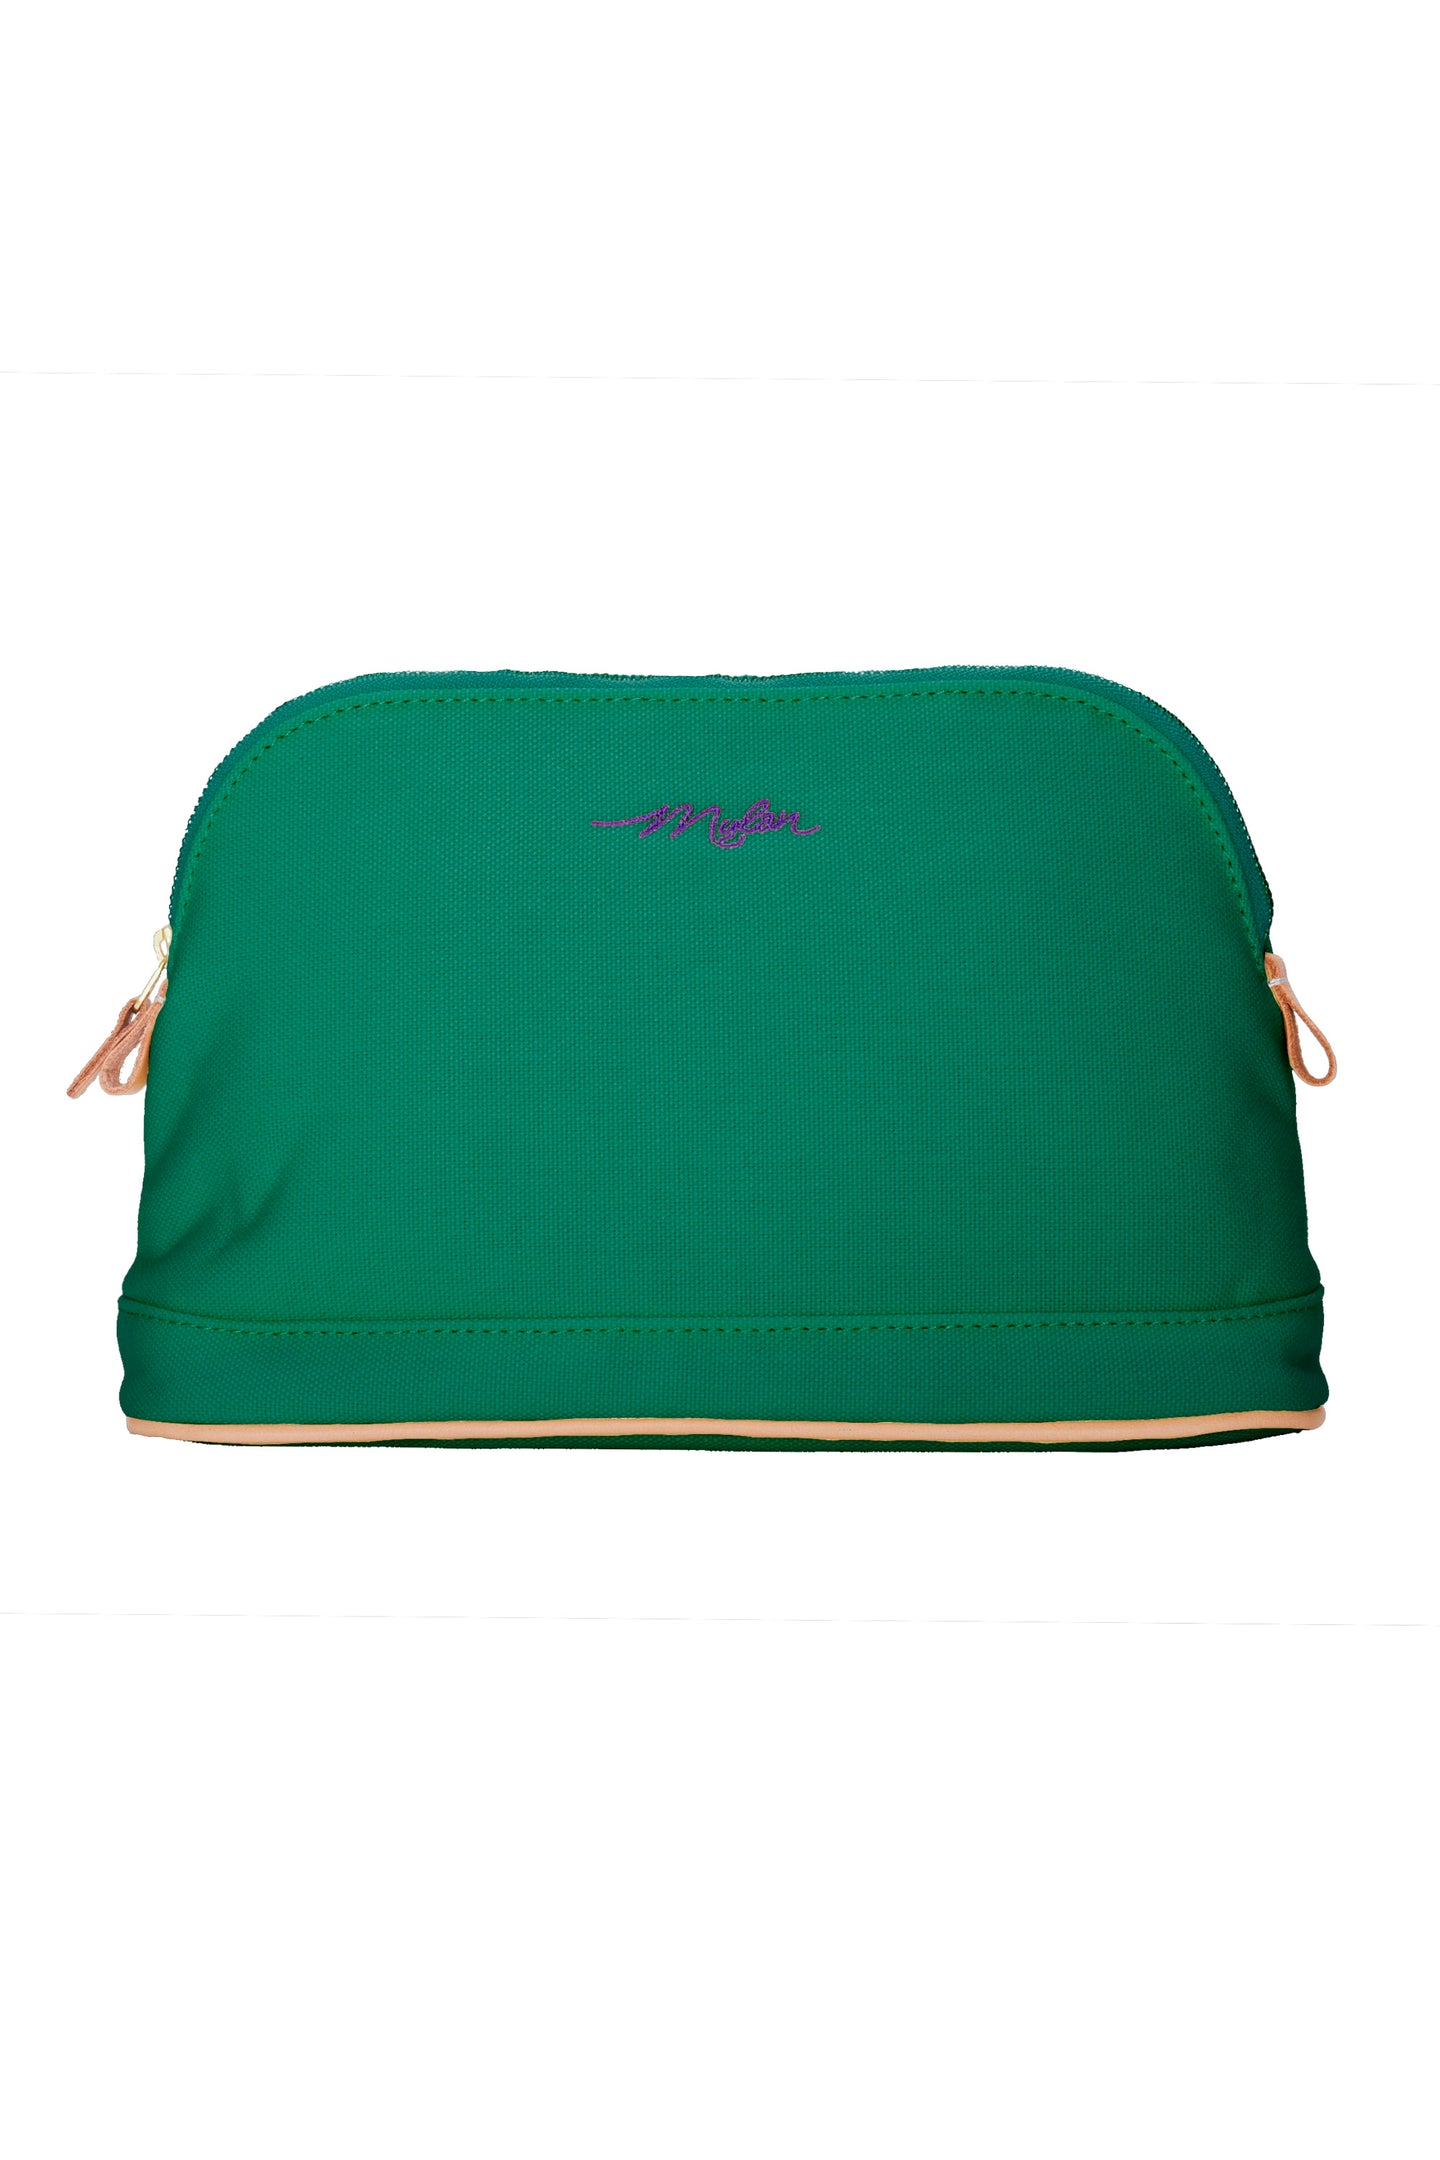 Travel Pouch - Small | Jungle Green